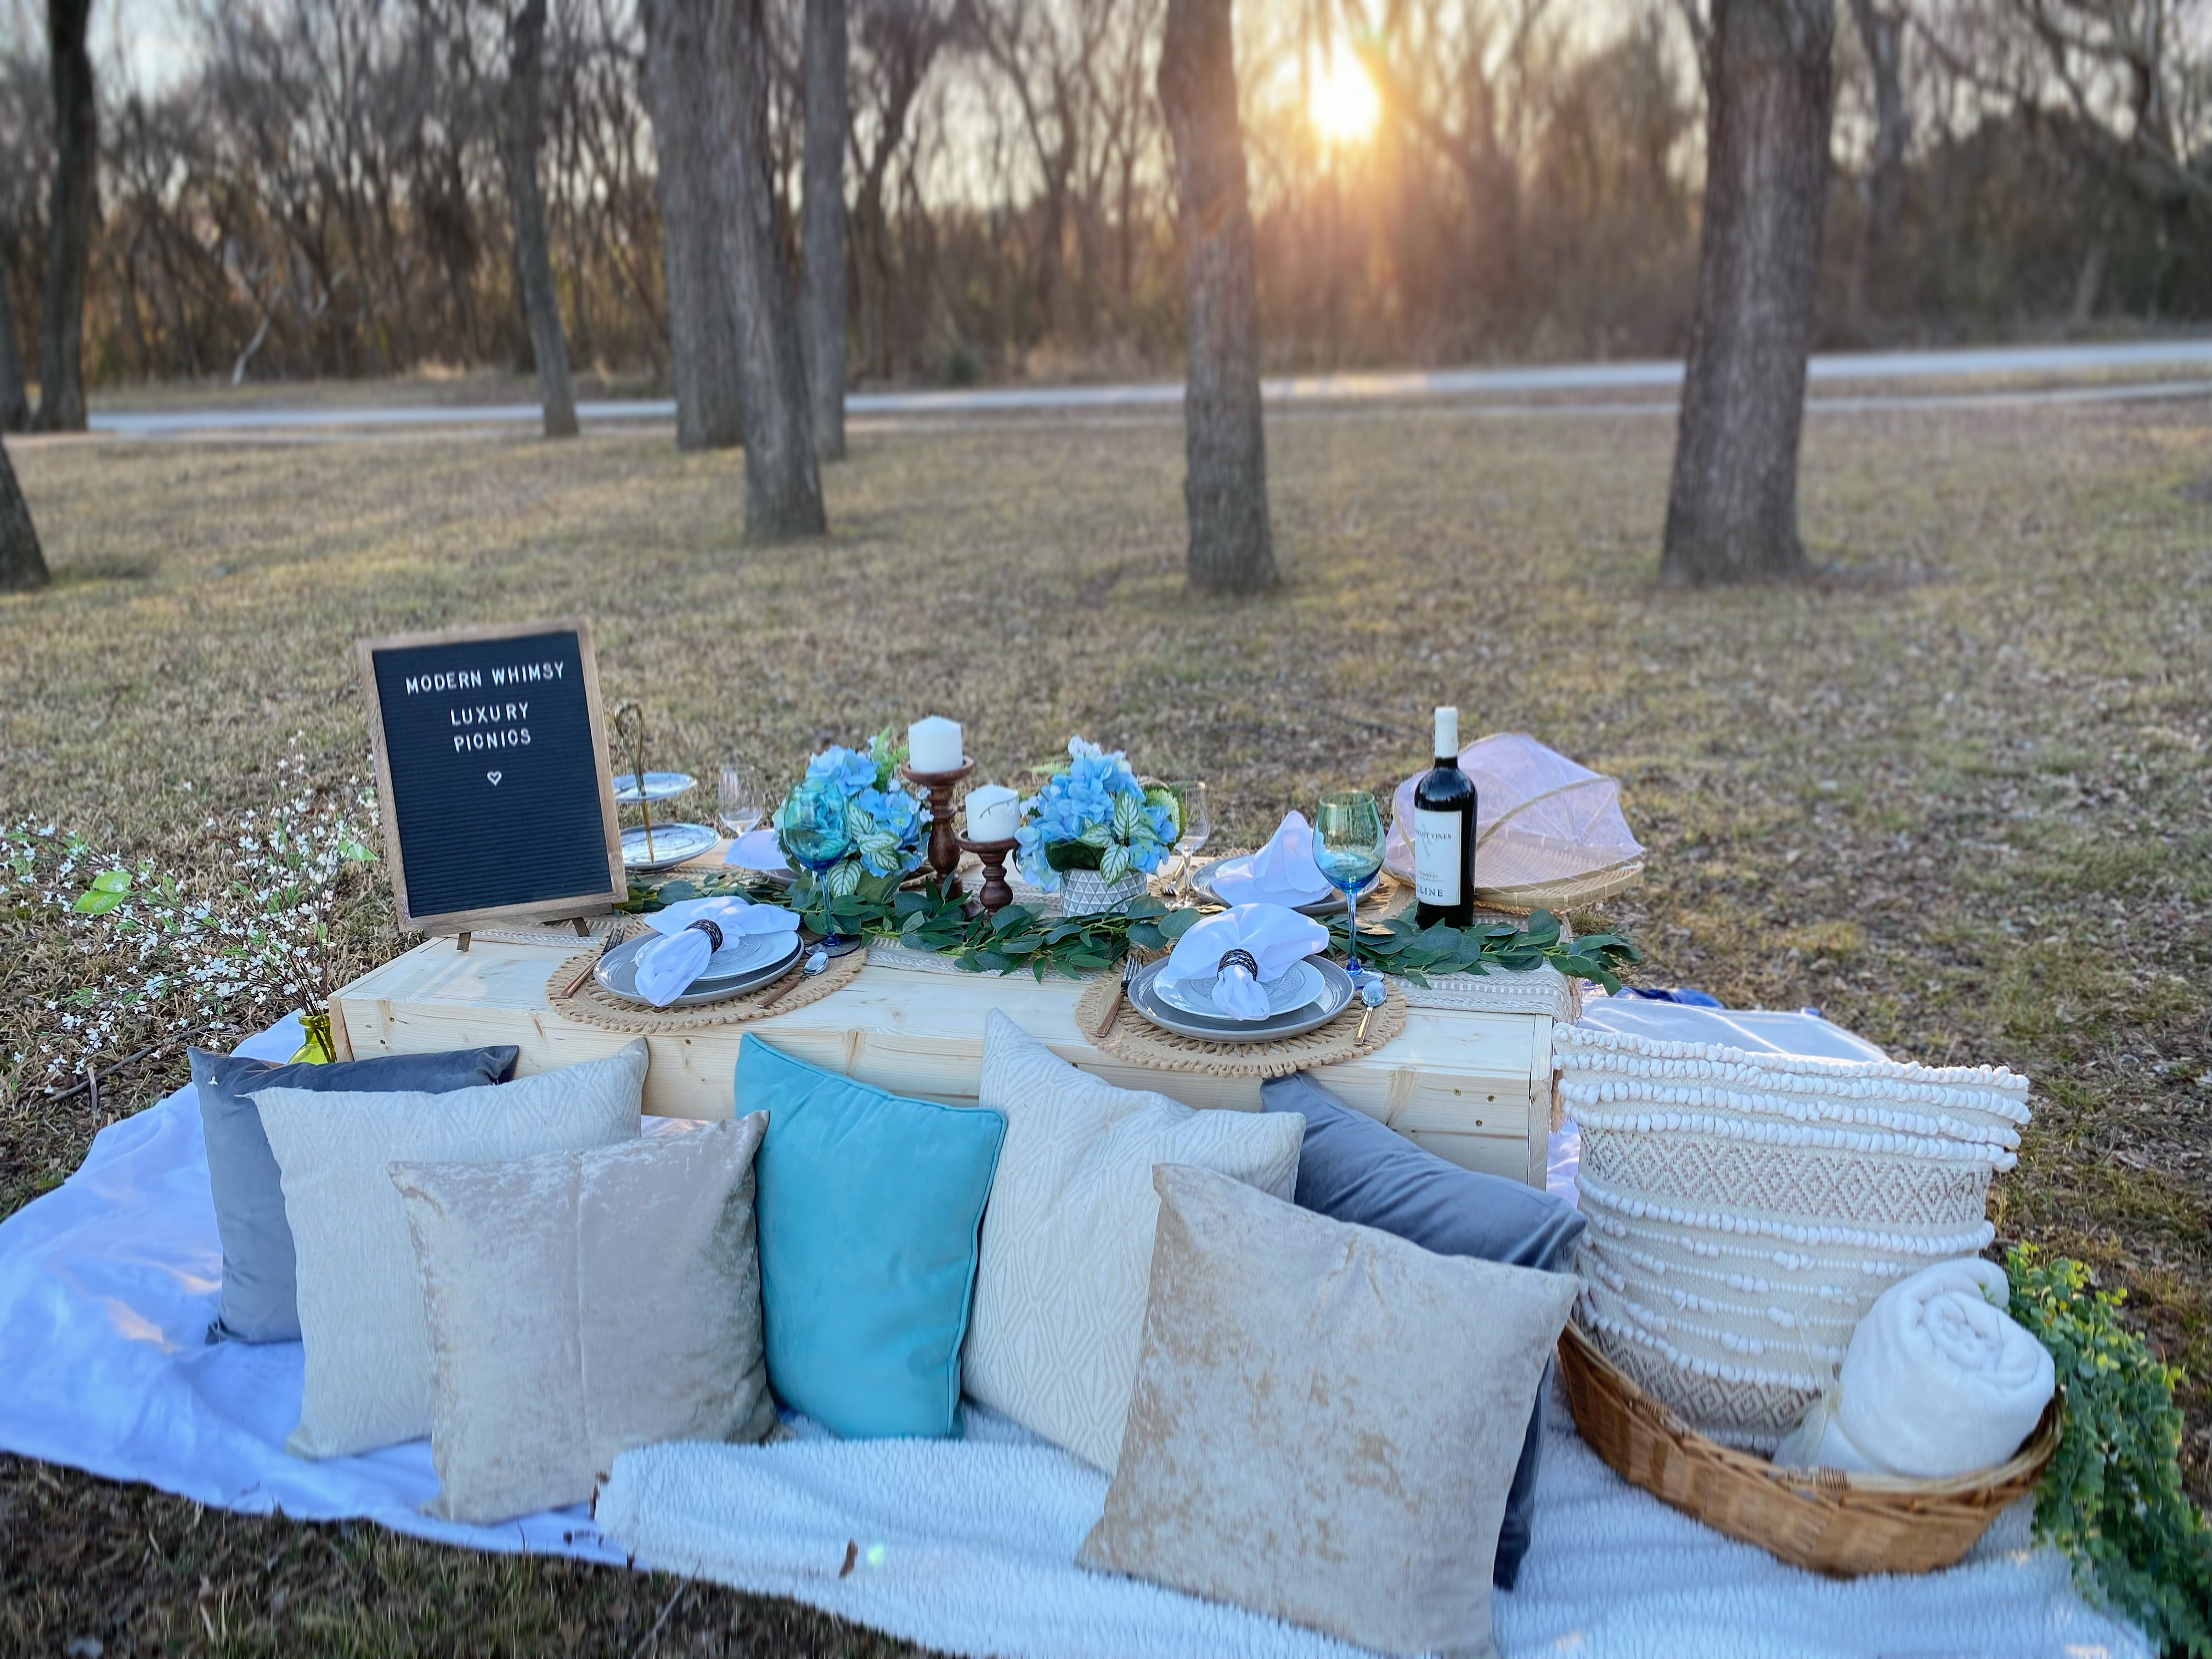 Modern Whimsy Luxury Picnics & Events